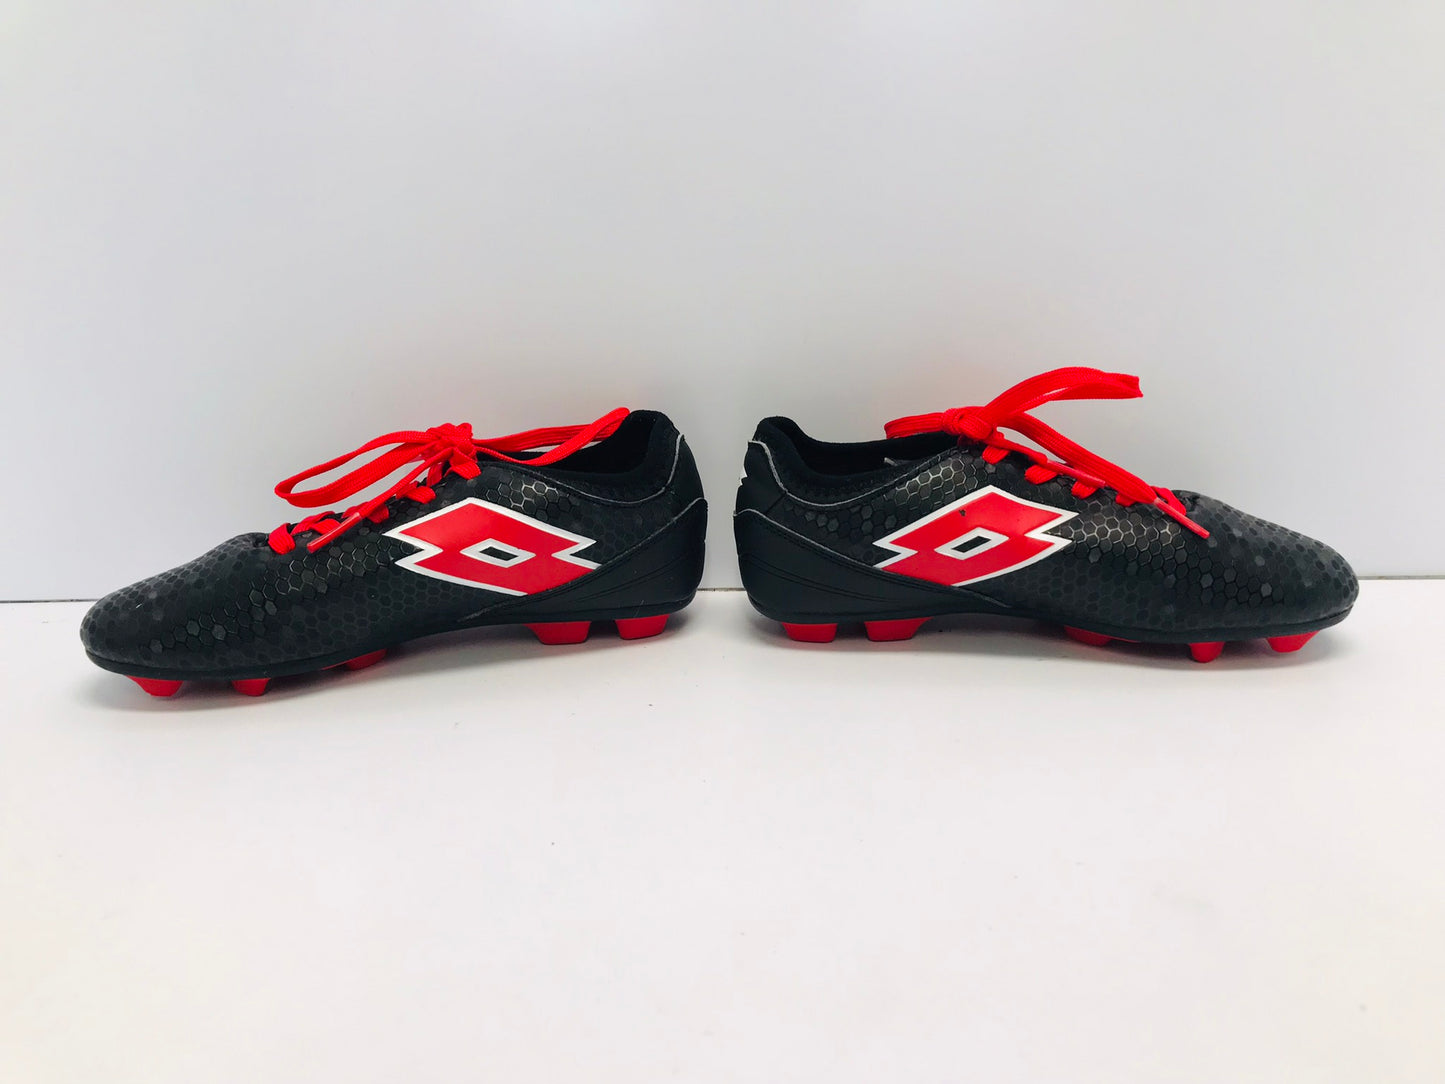 Soccer Shoes Cleats Child Size 1 Lotto Black Red Like New